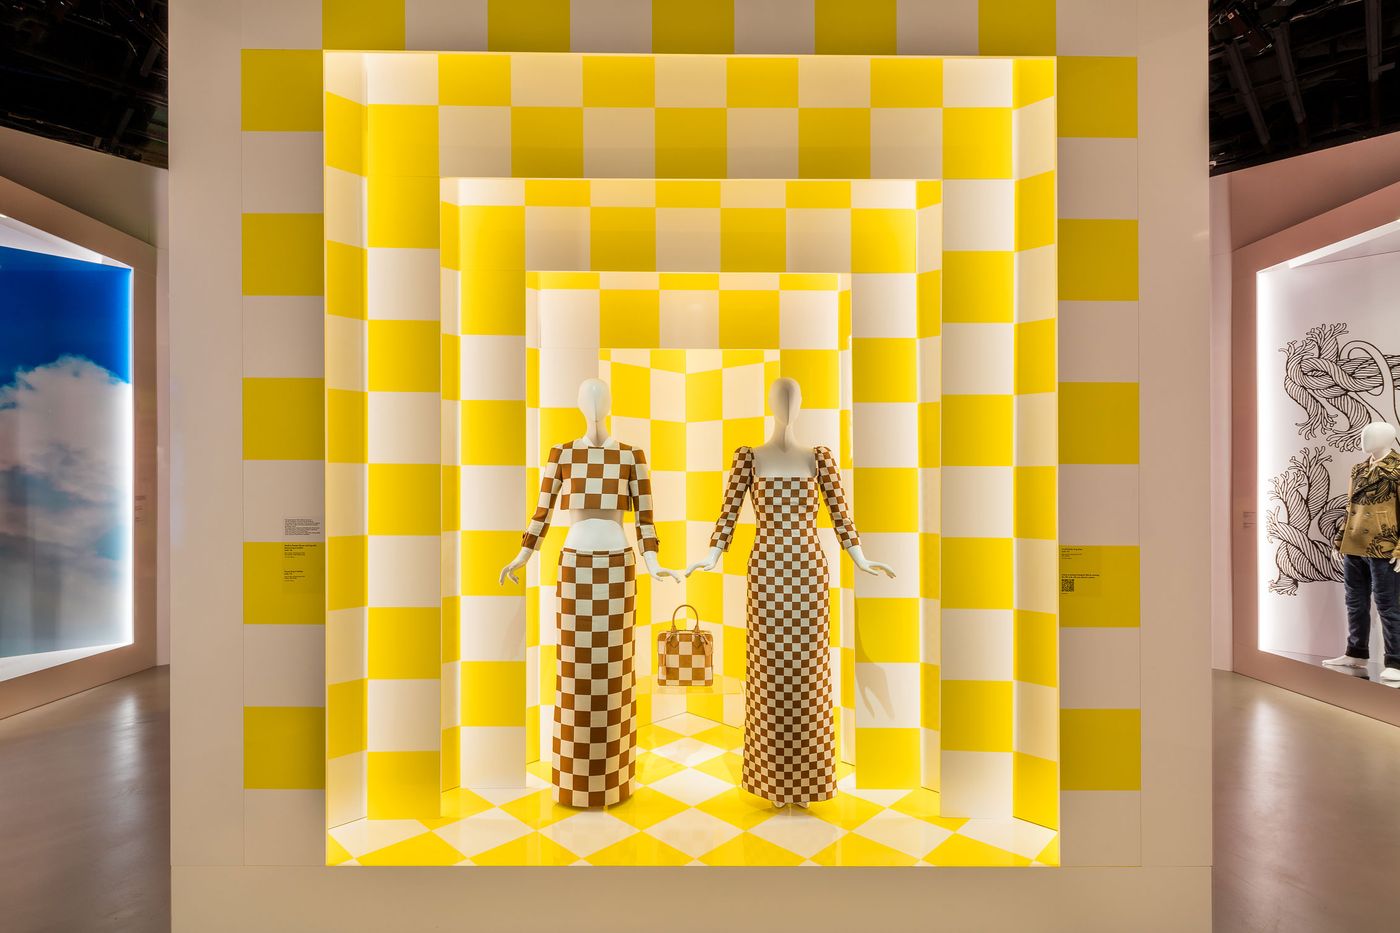 The louis vuitton exhibit will blow your mind - LAmag - Culture, Food,  Fashion, News & Los Angeles